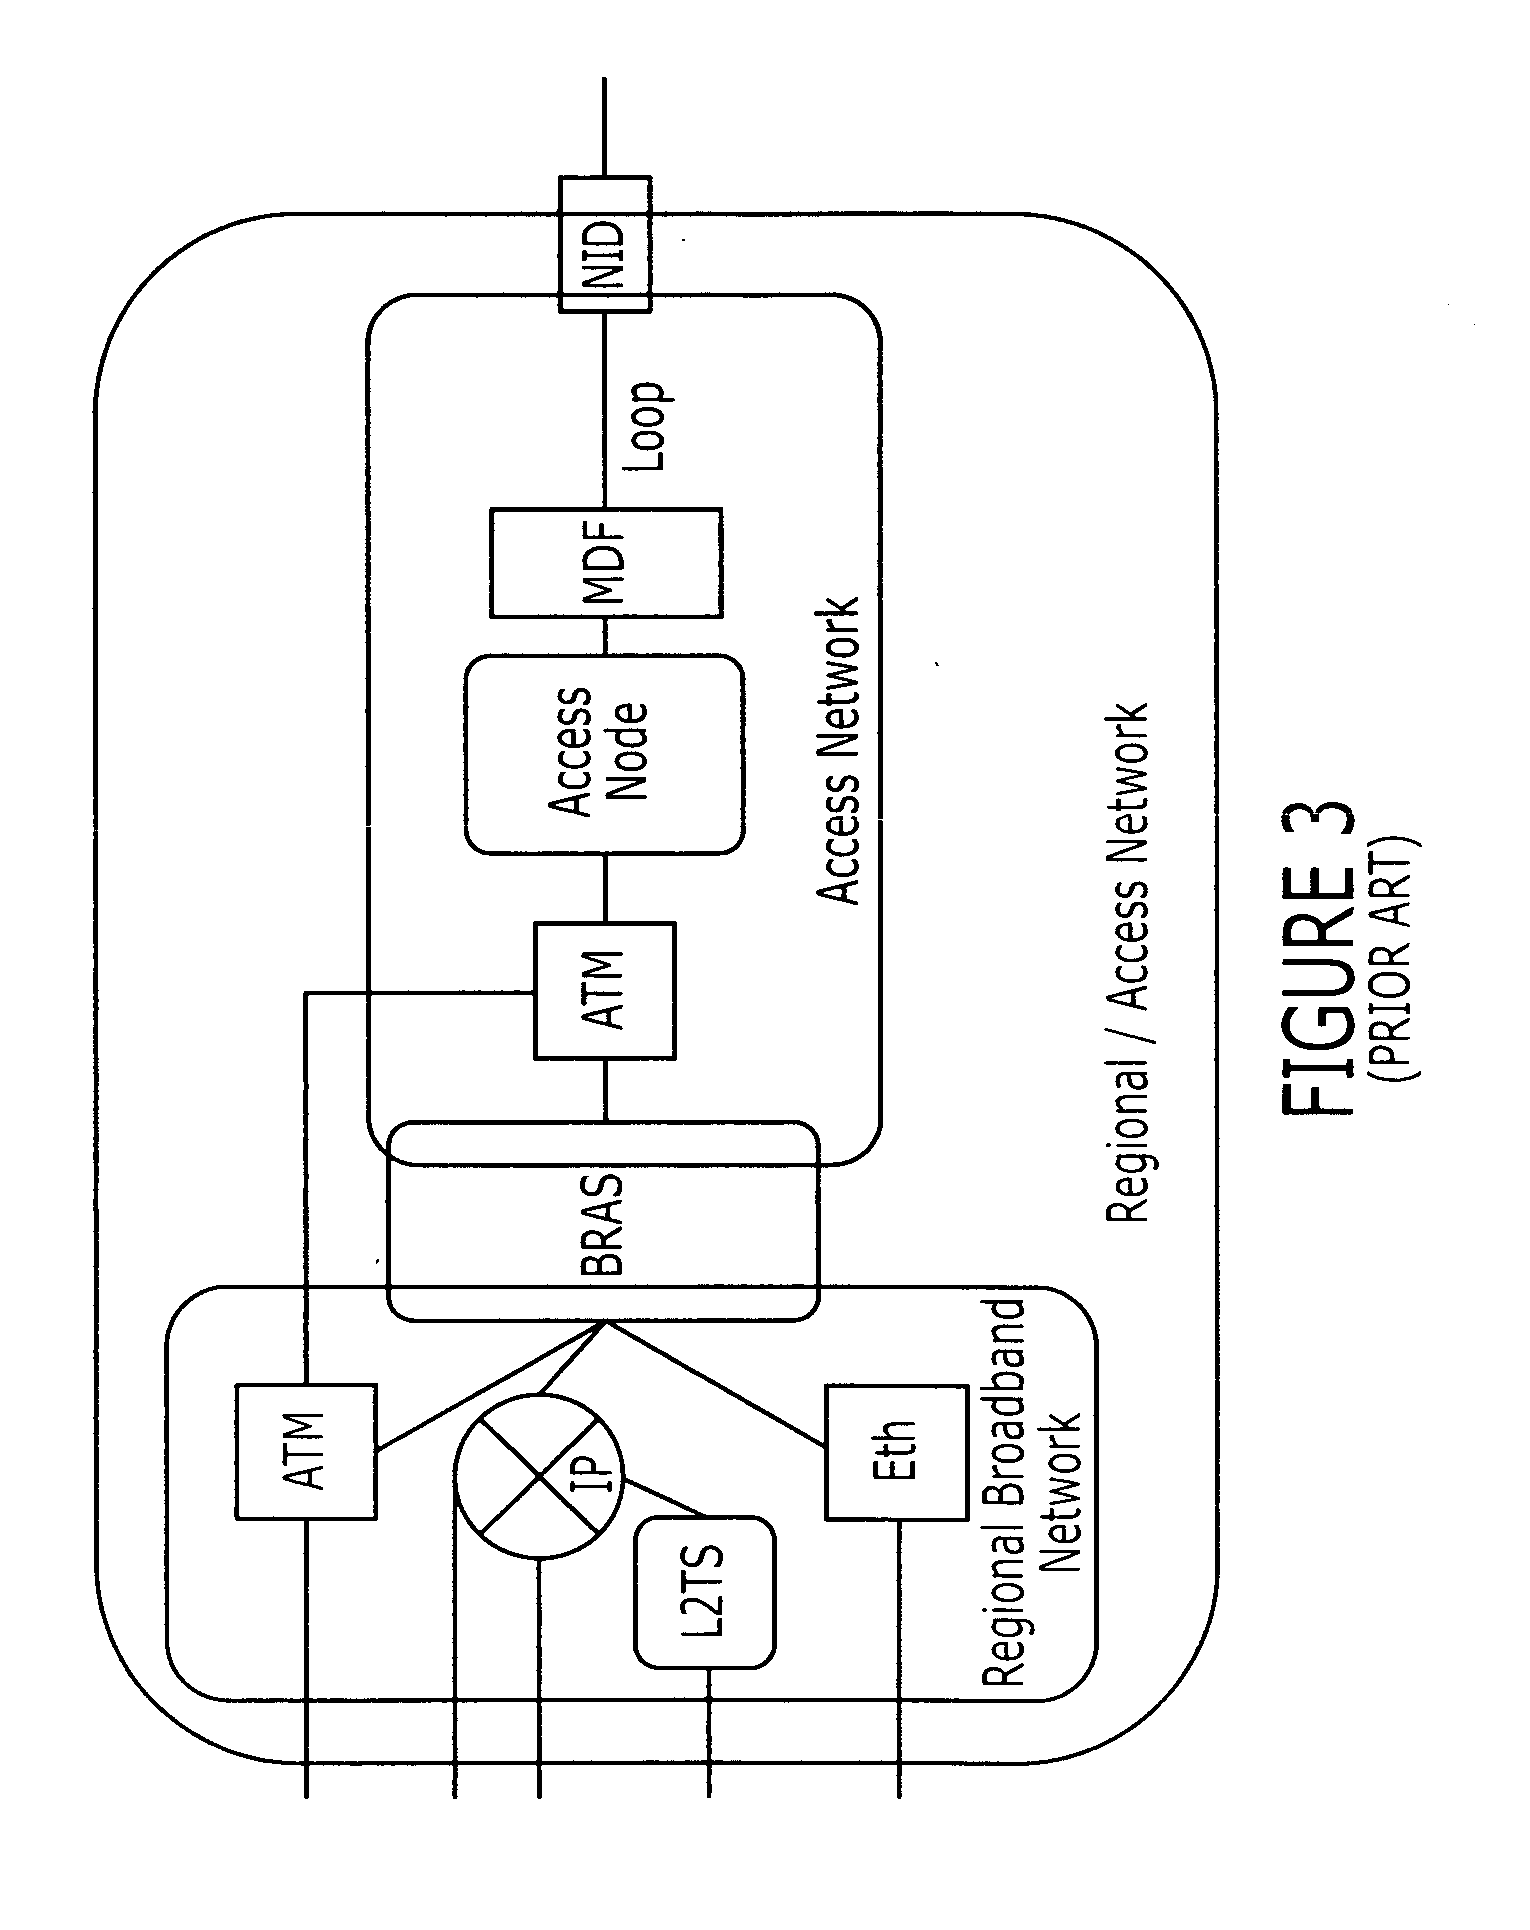 Methods, systems, and computer program products for managing admission control in a regional/access network based on implicit protocol detection